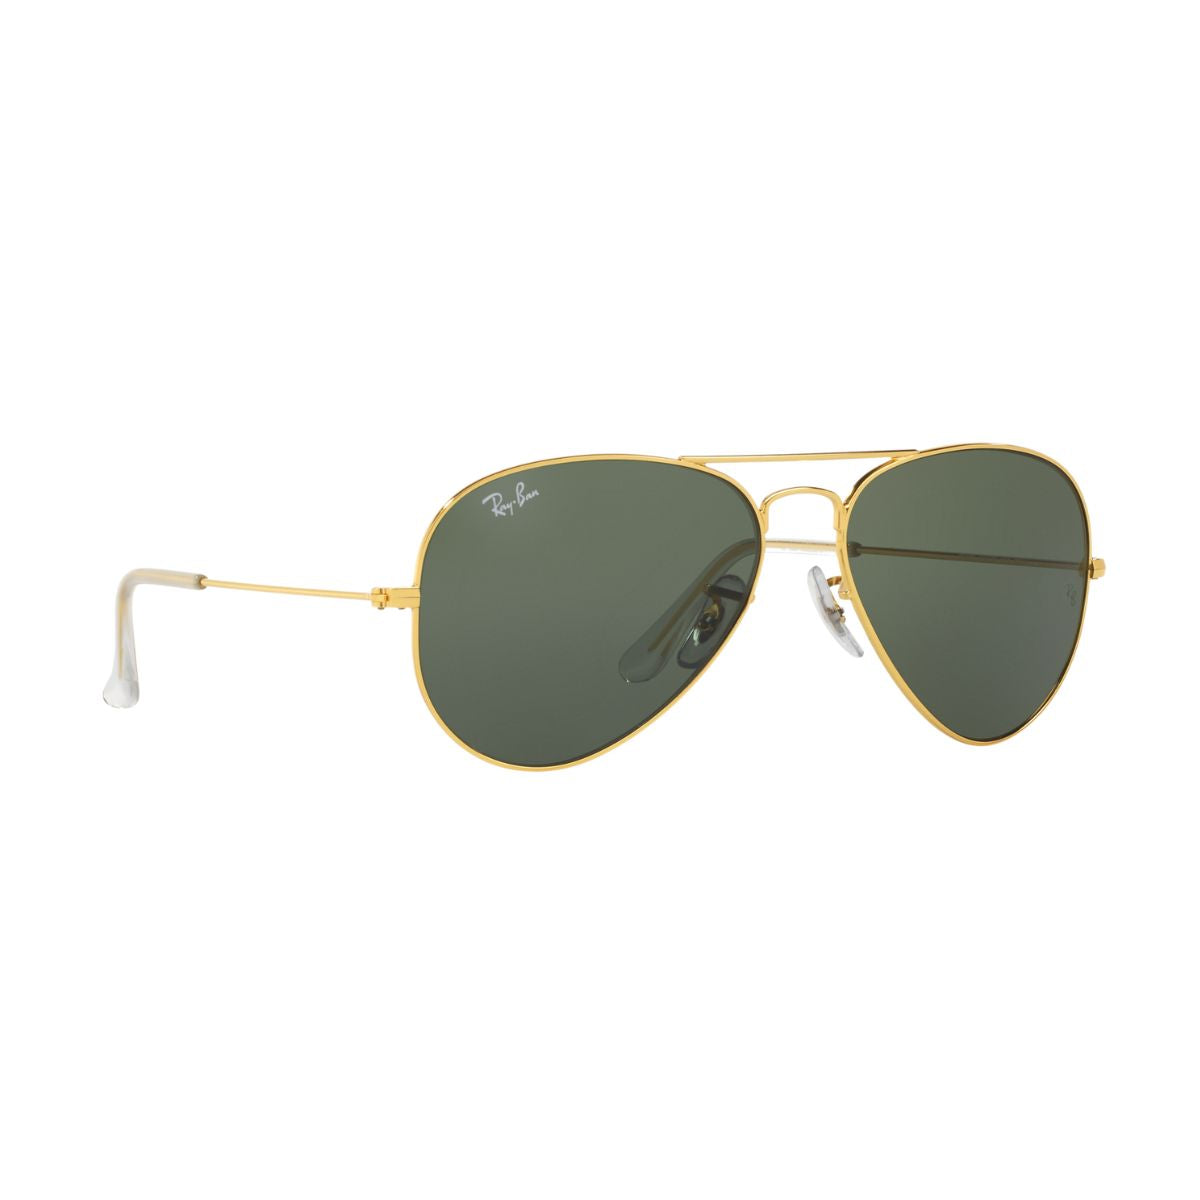 "Rayban 3025 0015 UV Protected Sunglass For Men's At Optorium"